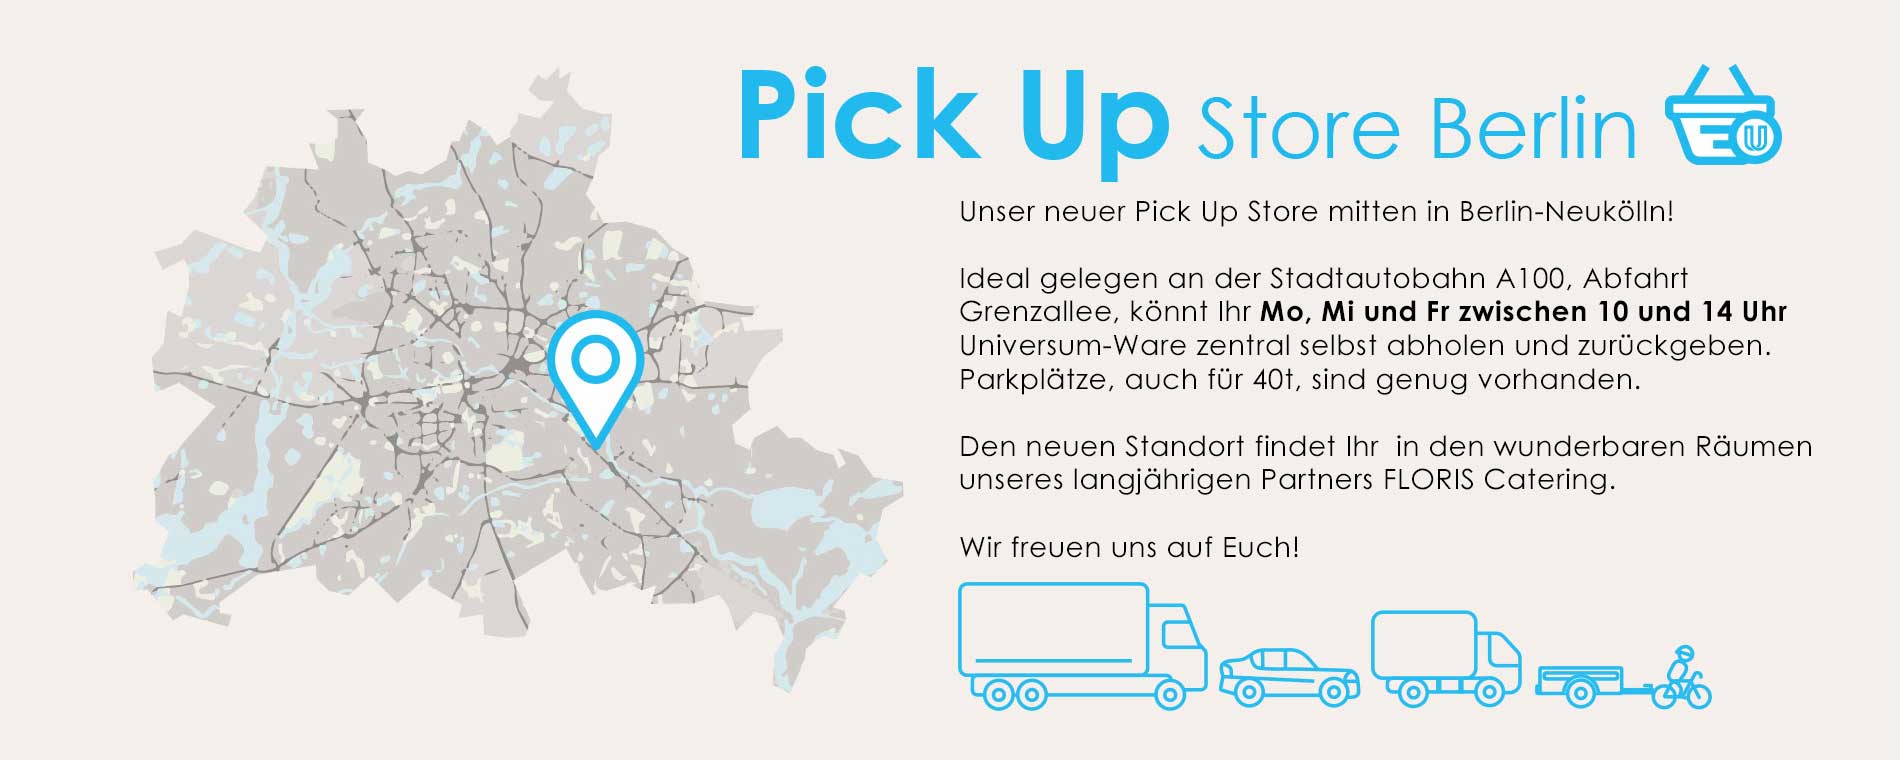 Pick-Up Store